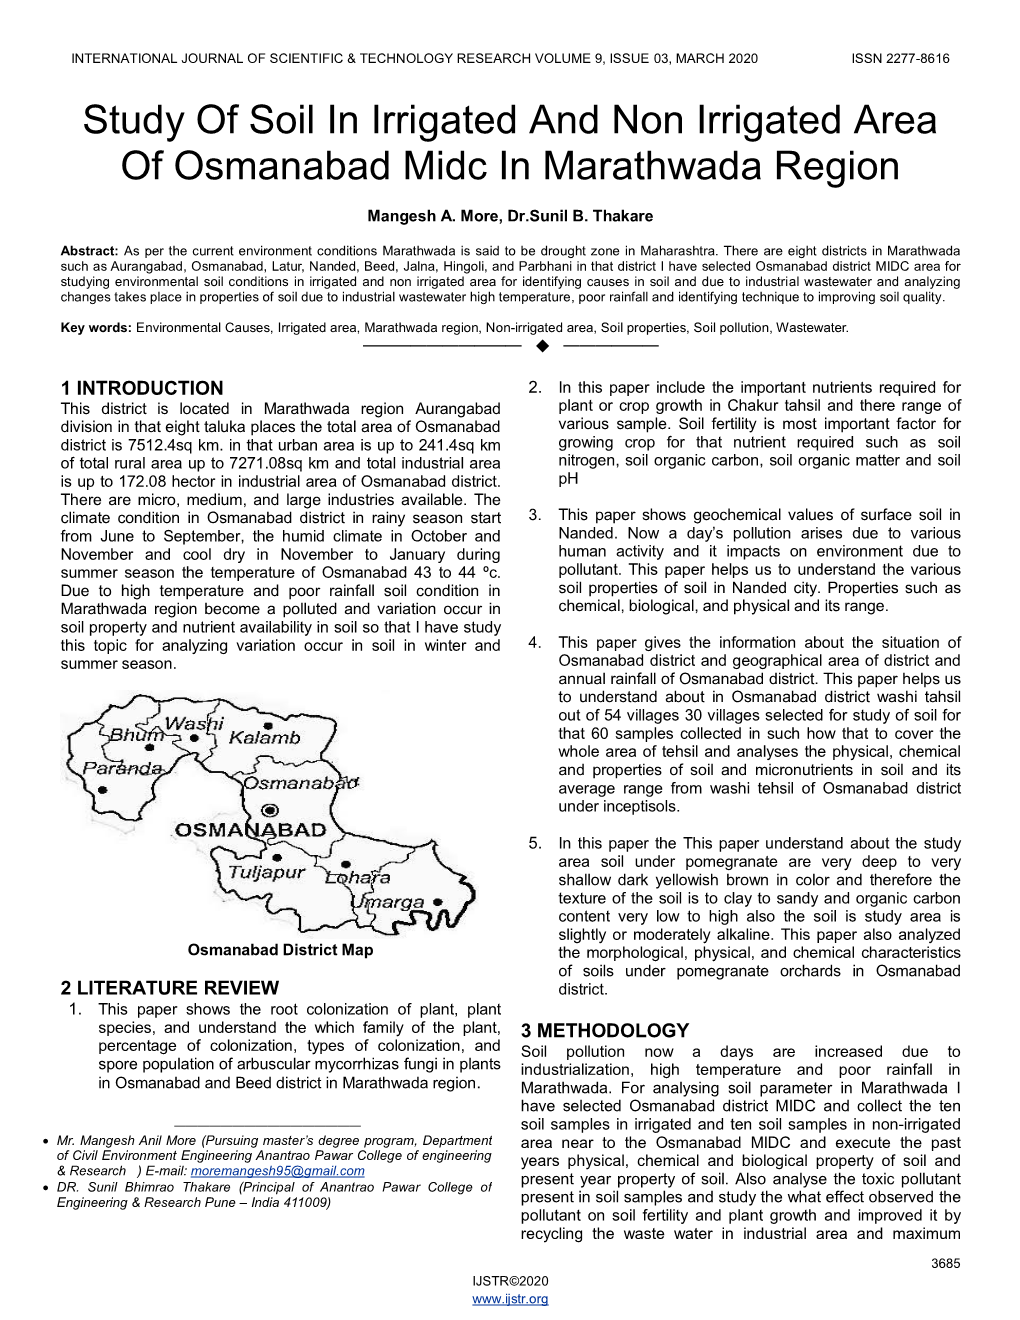 Study of Soil in Irrigated and Non Irrigated Area of Osmanabad Midc in Marathwada Region